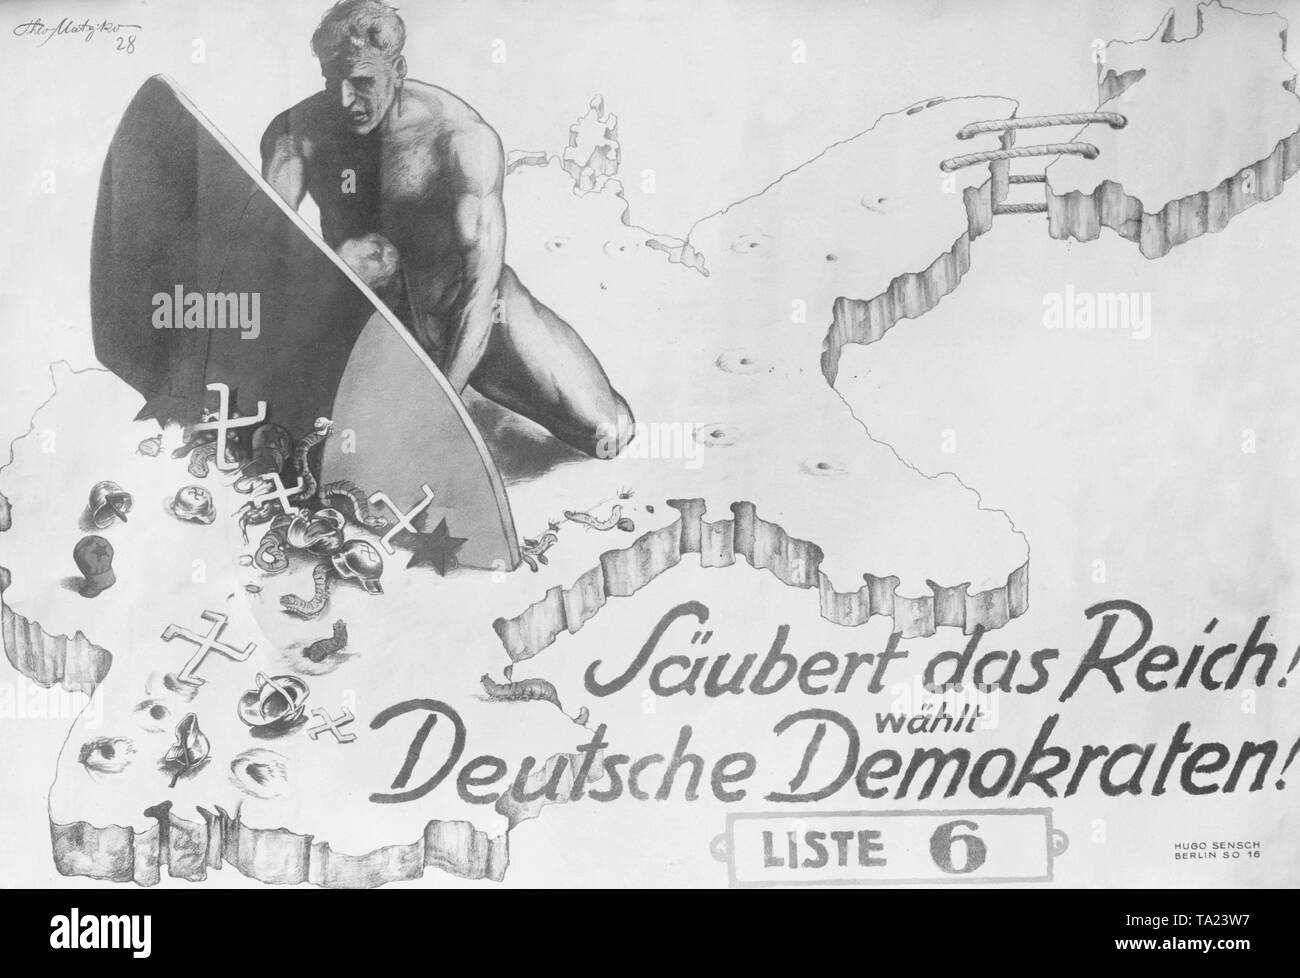 Election poster of the German Democratic Party (DDP) for the Reichstag election in Berlin, 1928. The appeal says: 'Clear the Reich! Vote for the German Democrats! List 6 '. In the poster, a muscular man is pulling out a series of swastikas, red stars and worms with steel helmets from ??the German Reich. Stock Photo